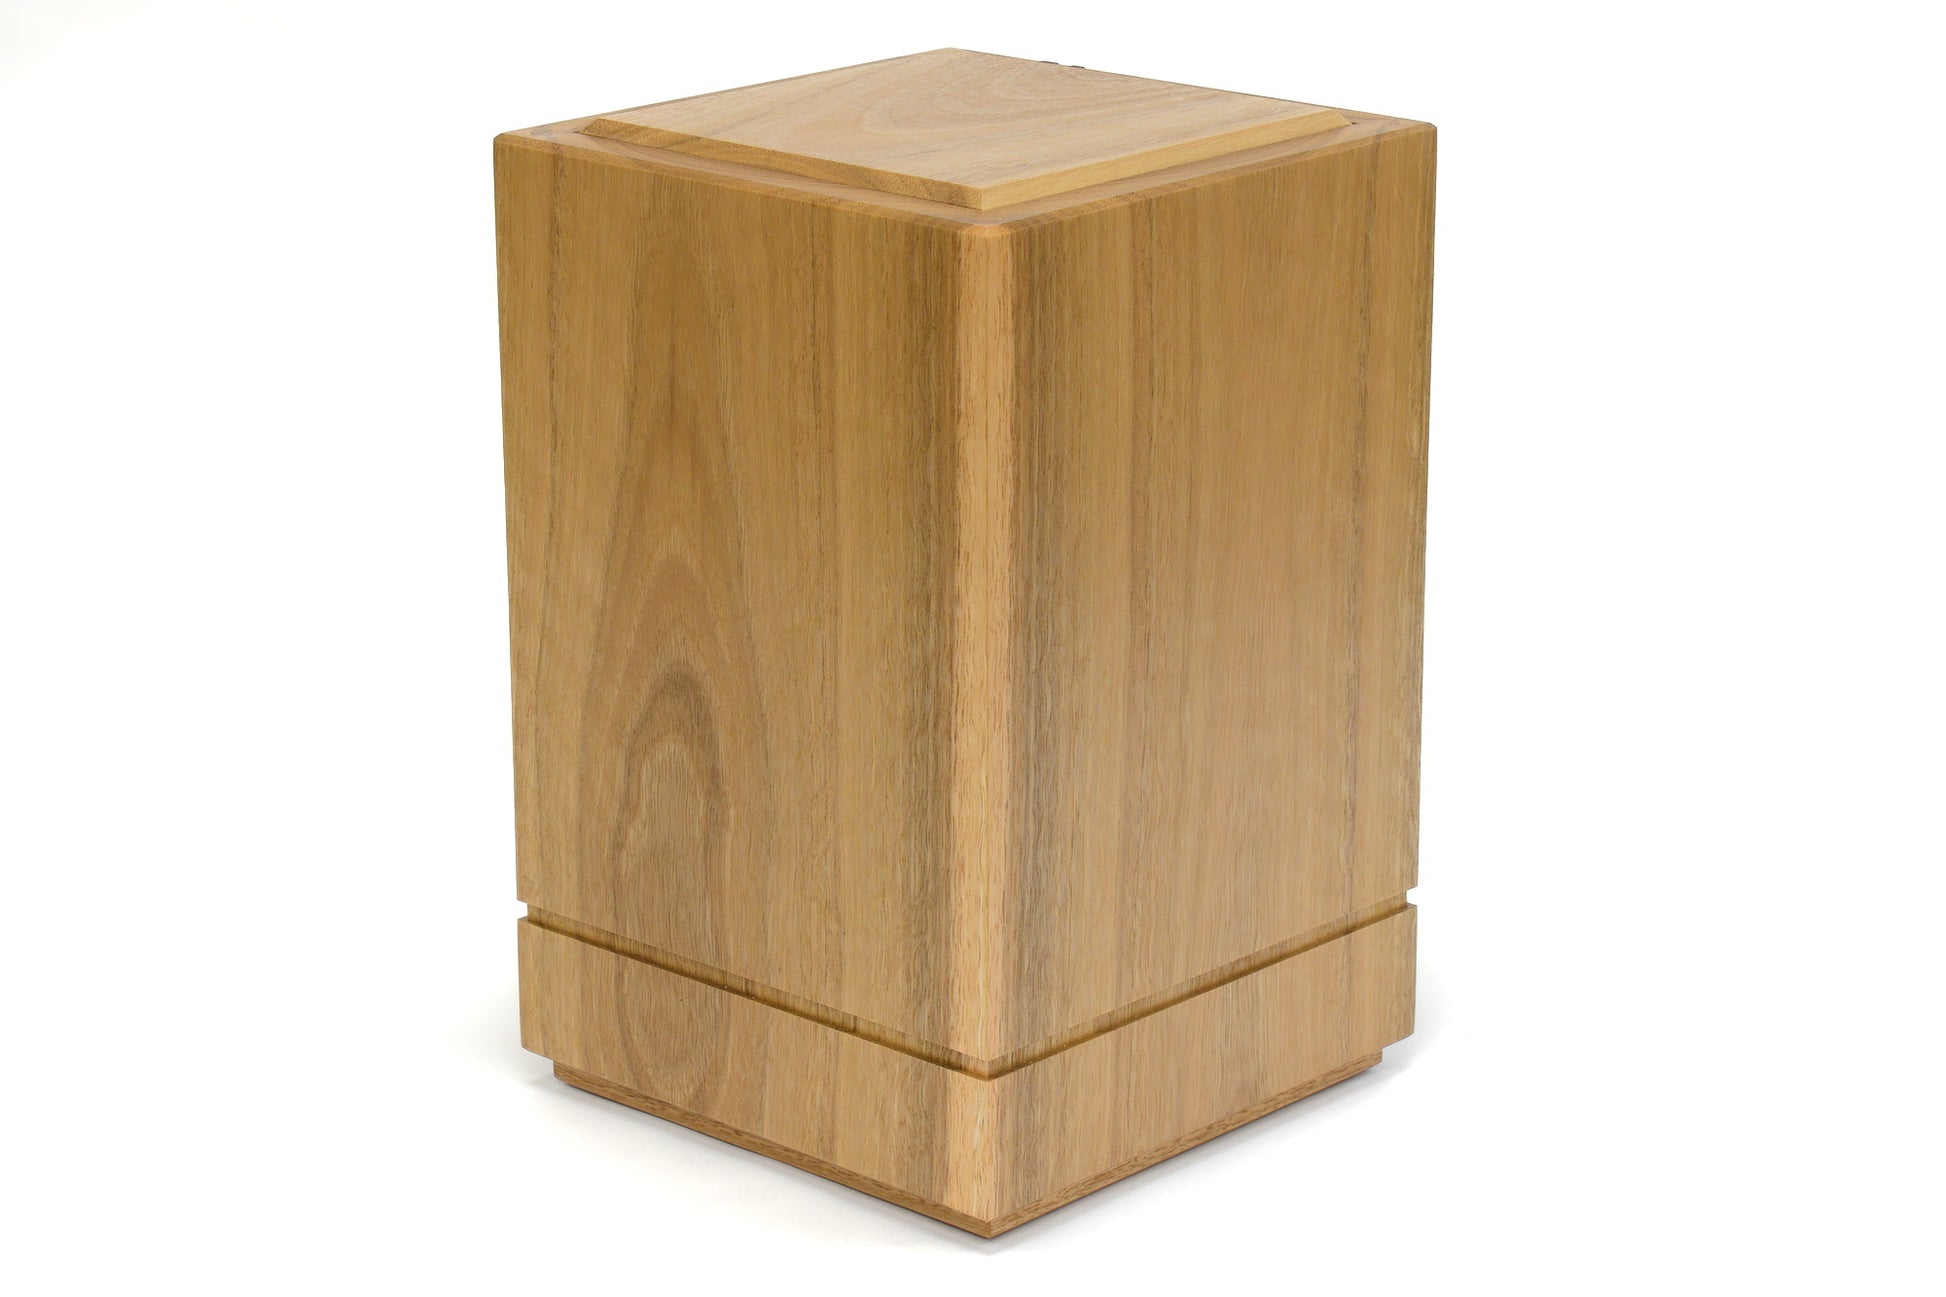 Wooden cremation urn handcrafted from Spotted Gum